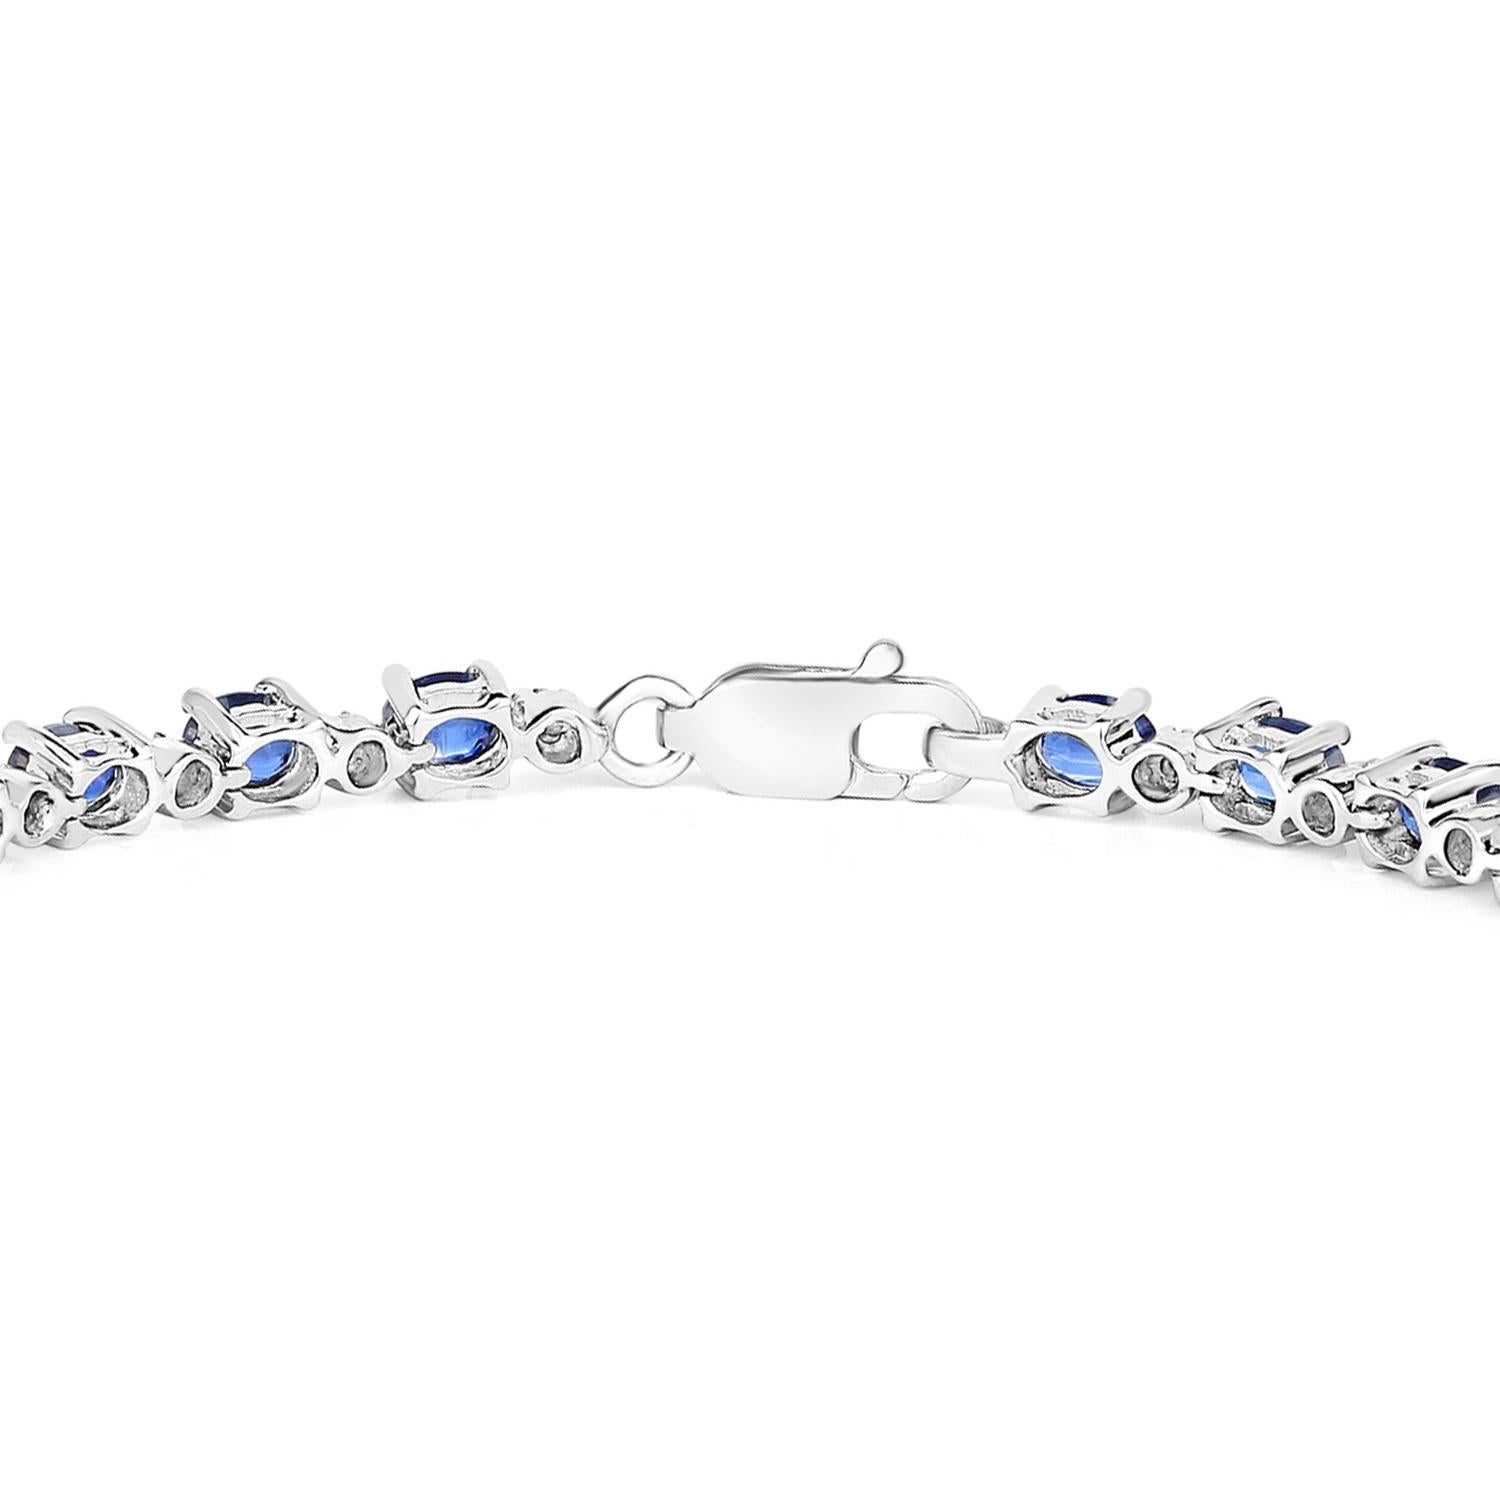 Kyanite Tennis Bracelet With Diamonds 6.73 Carats Rhodium Plated Sterling Silver In Excellent Condition For Sale In Laguna Niguel, CA